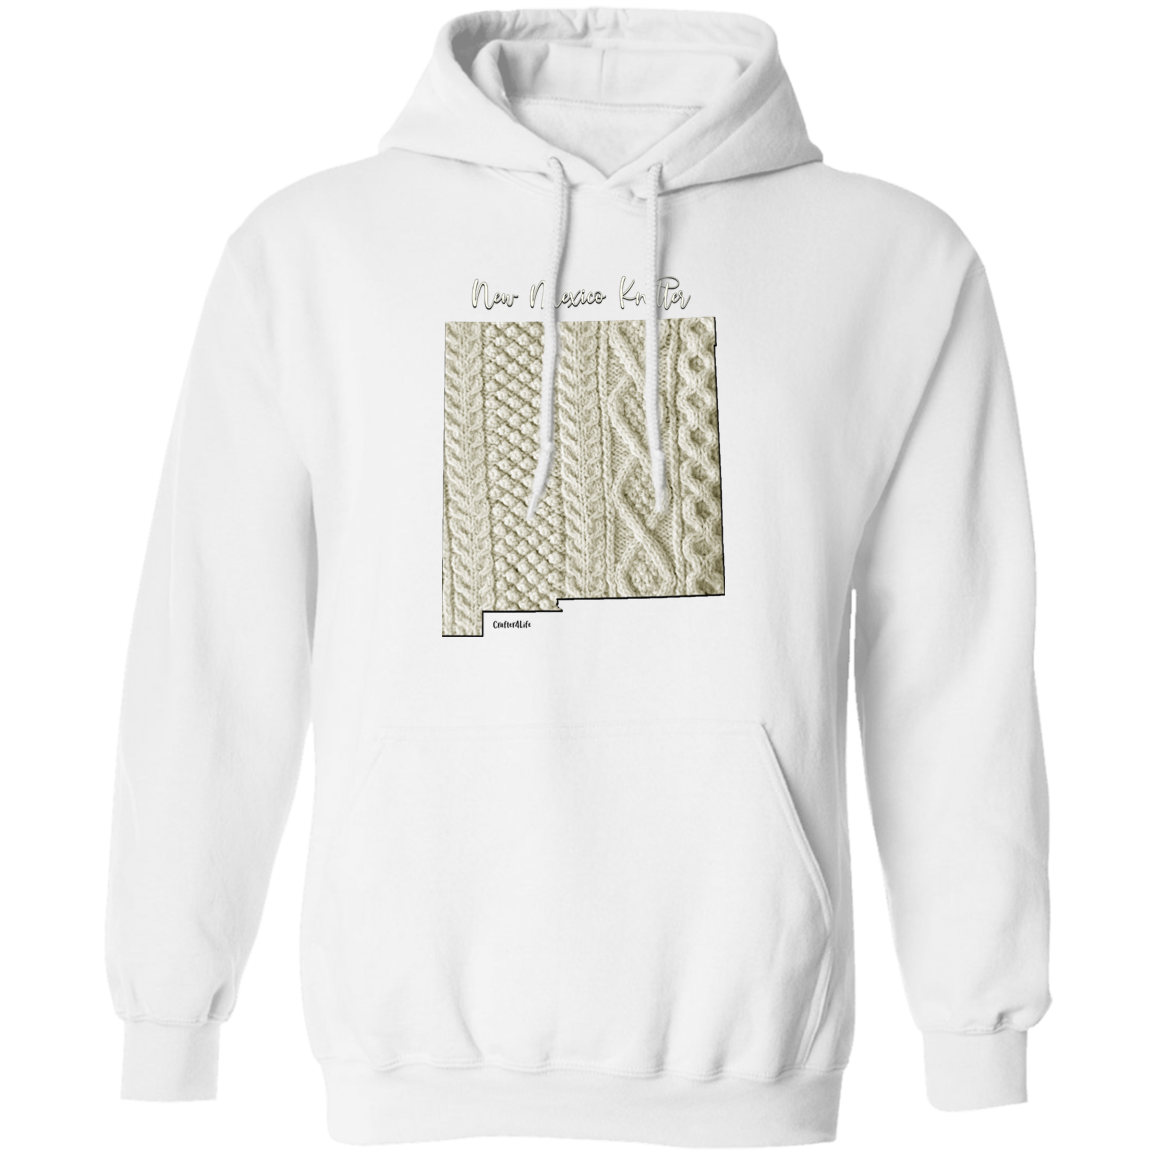 New Mexico Knitter Pullover Hoodie